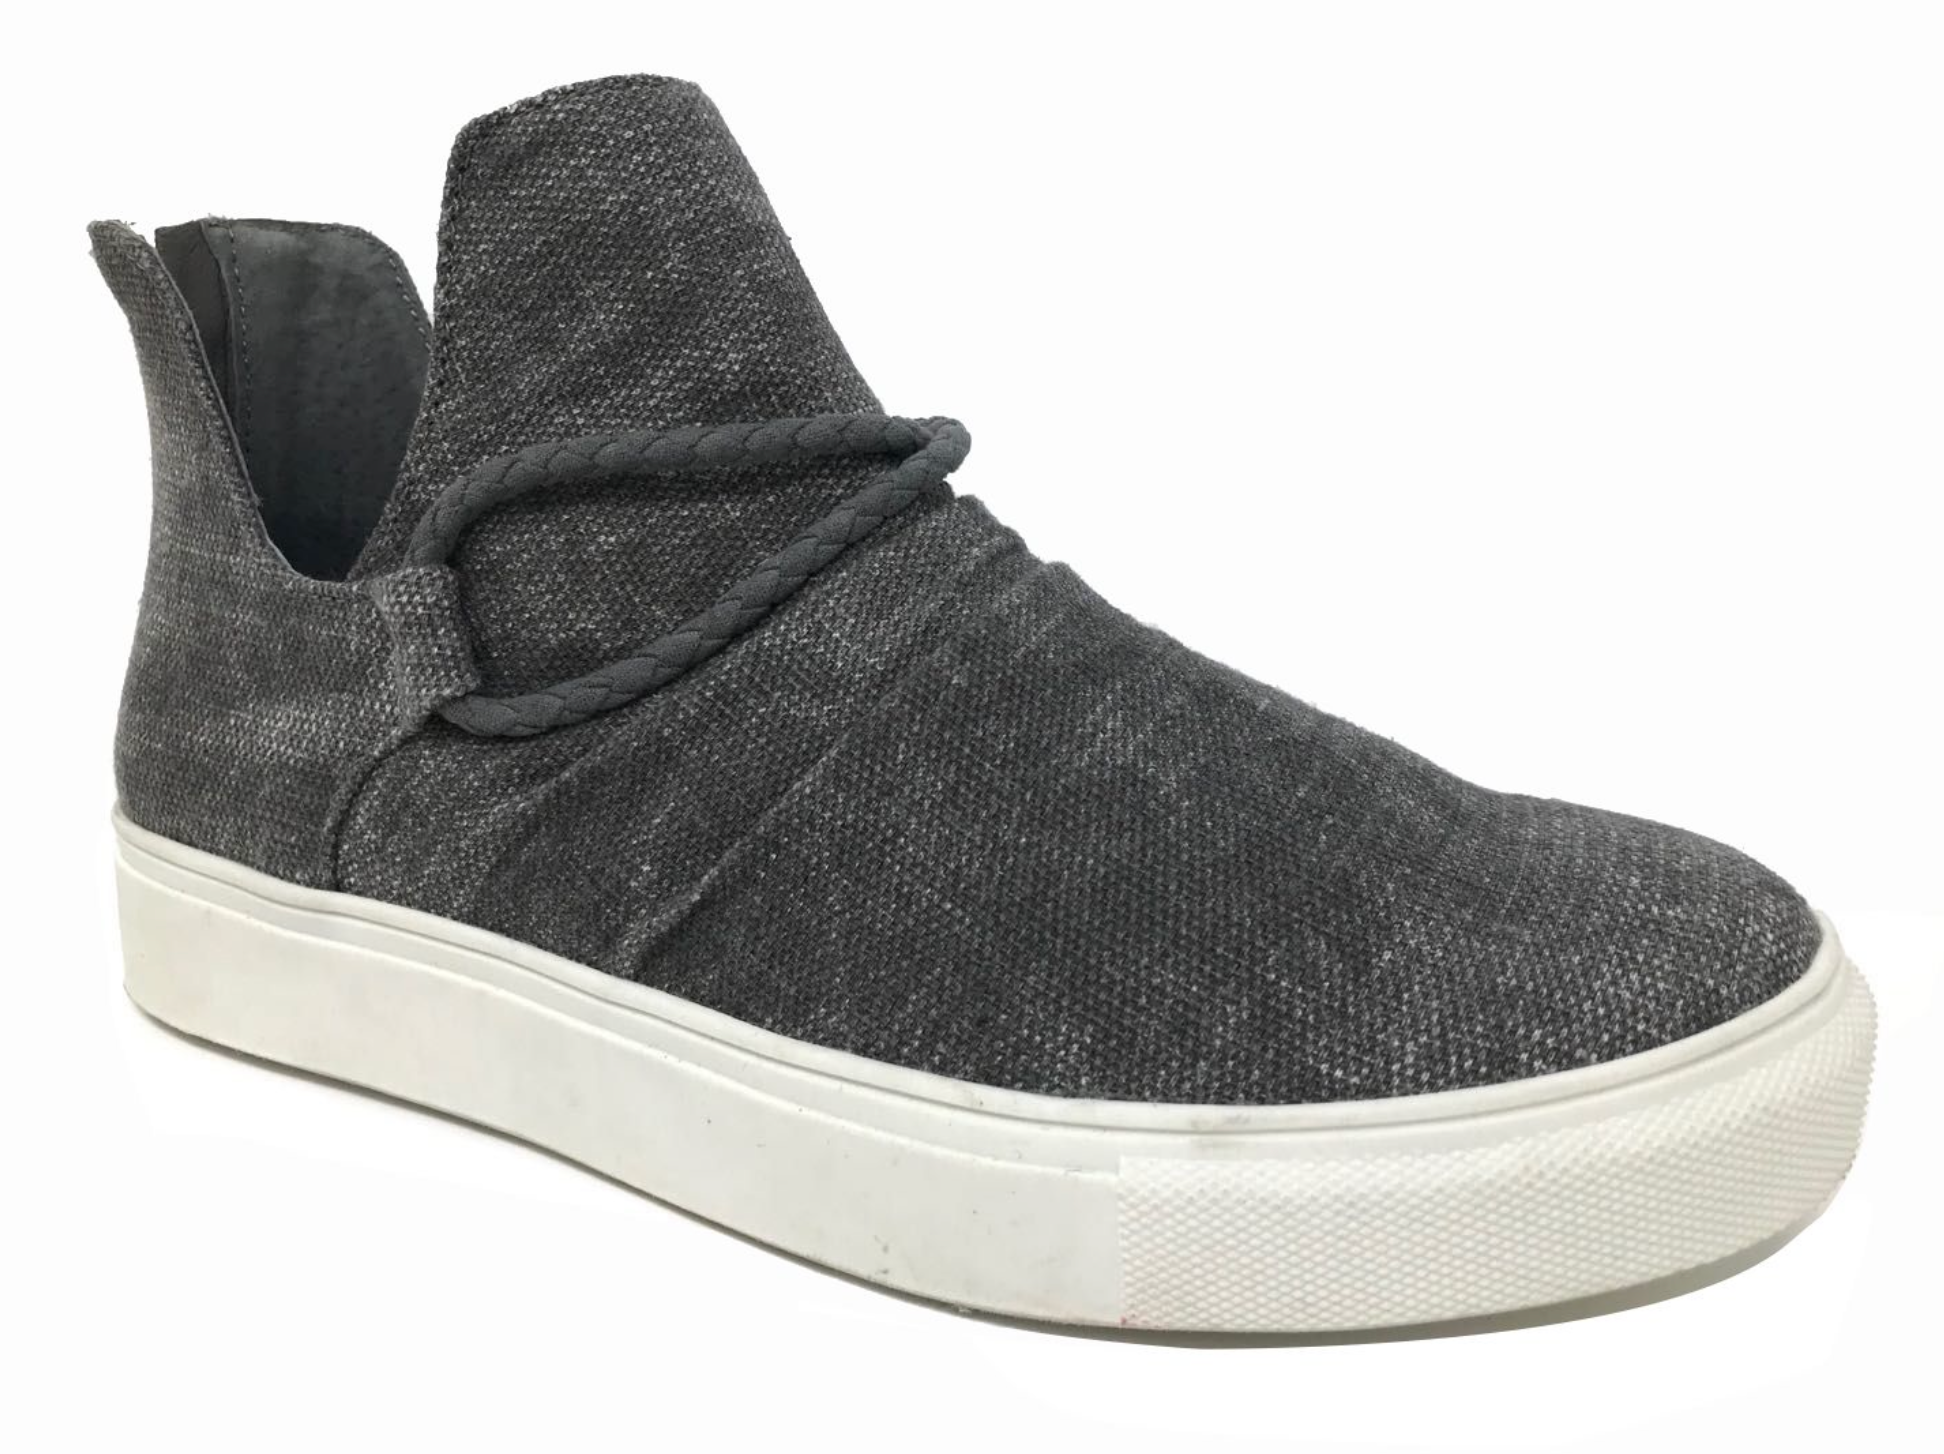 Very G "Legacy" Grey Slip-on Shoes-Shoes-Sunshine and Wine Boutique